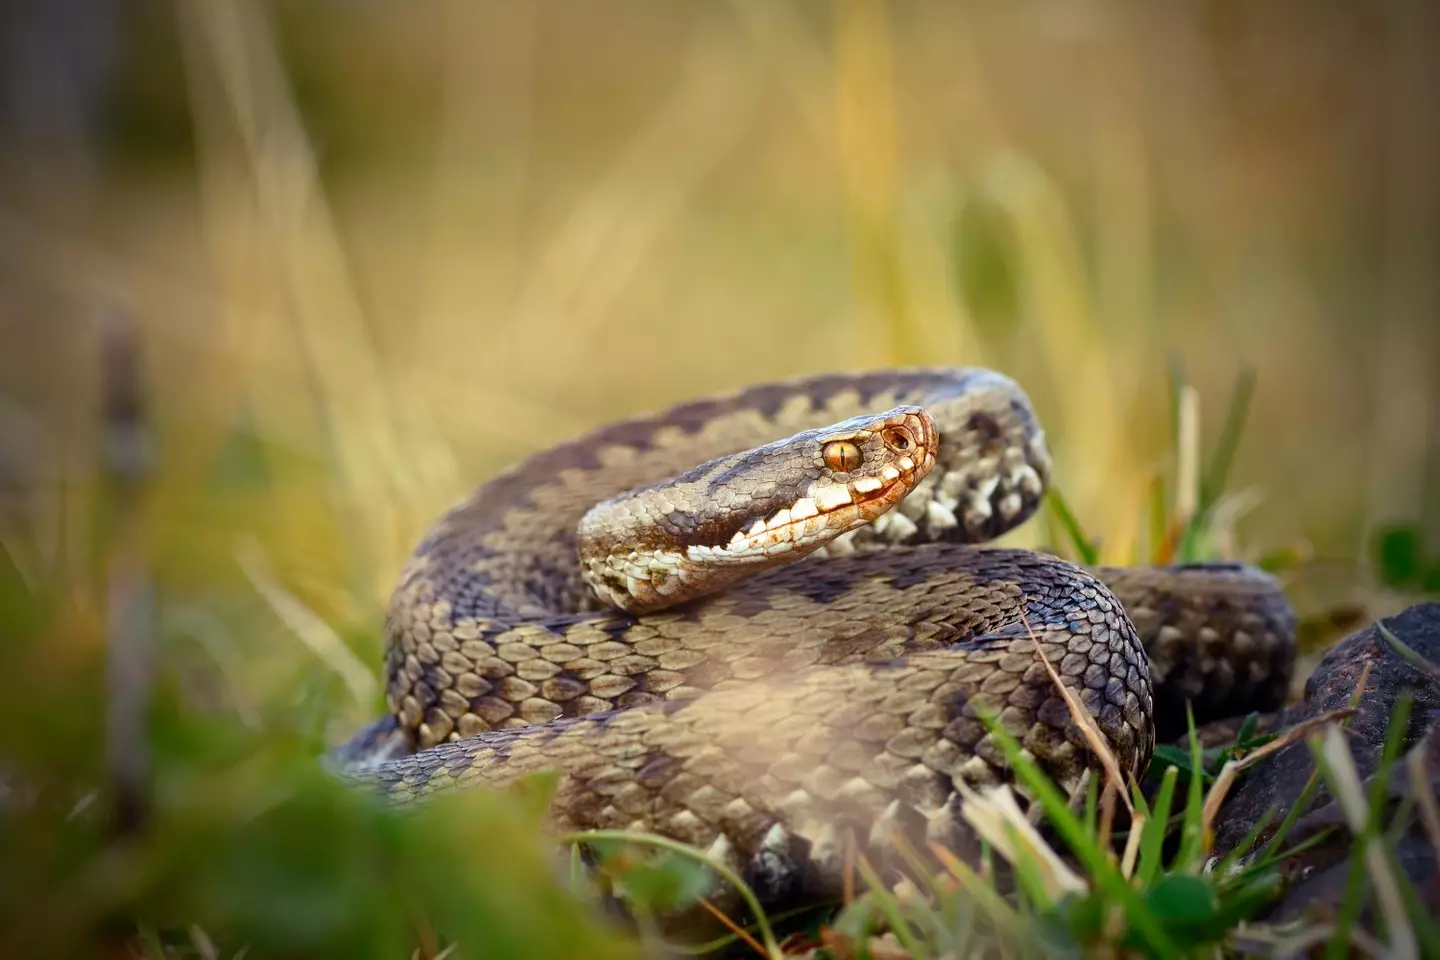 Scientists have discovered female snakes have clitorises.